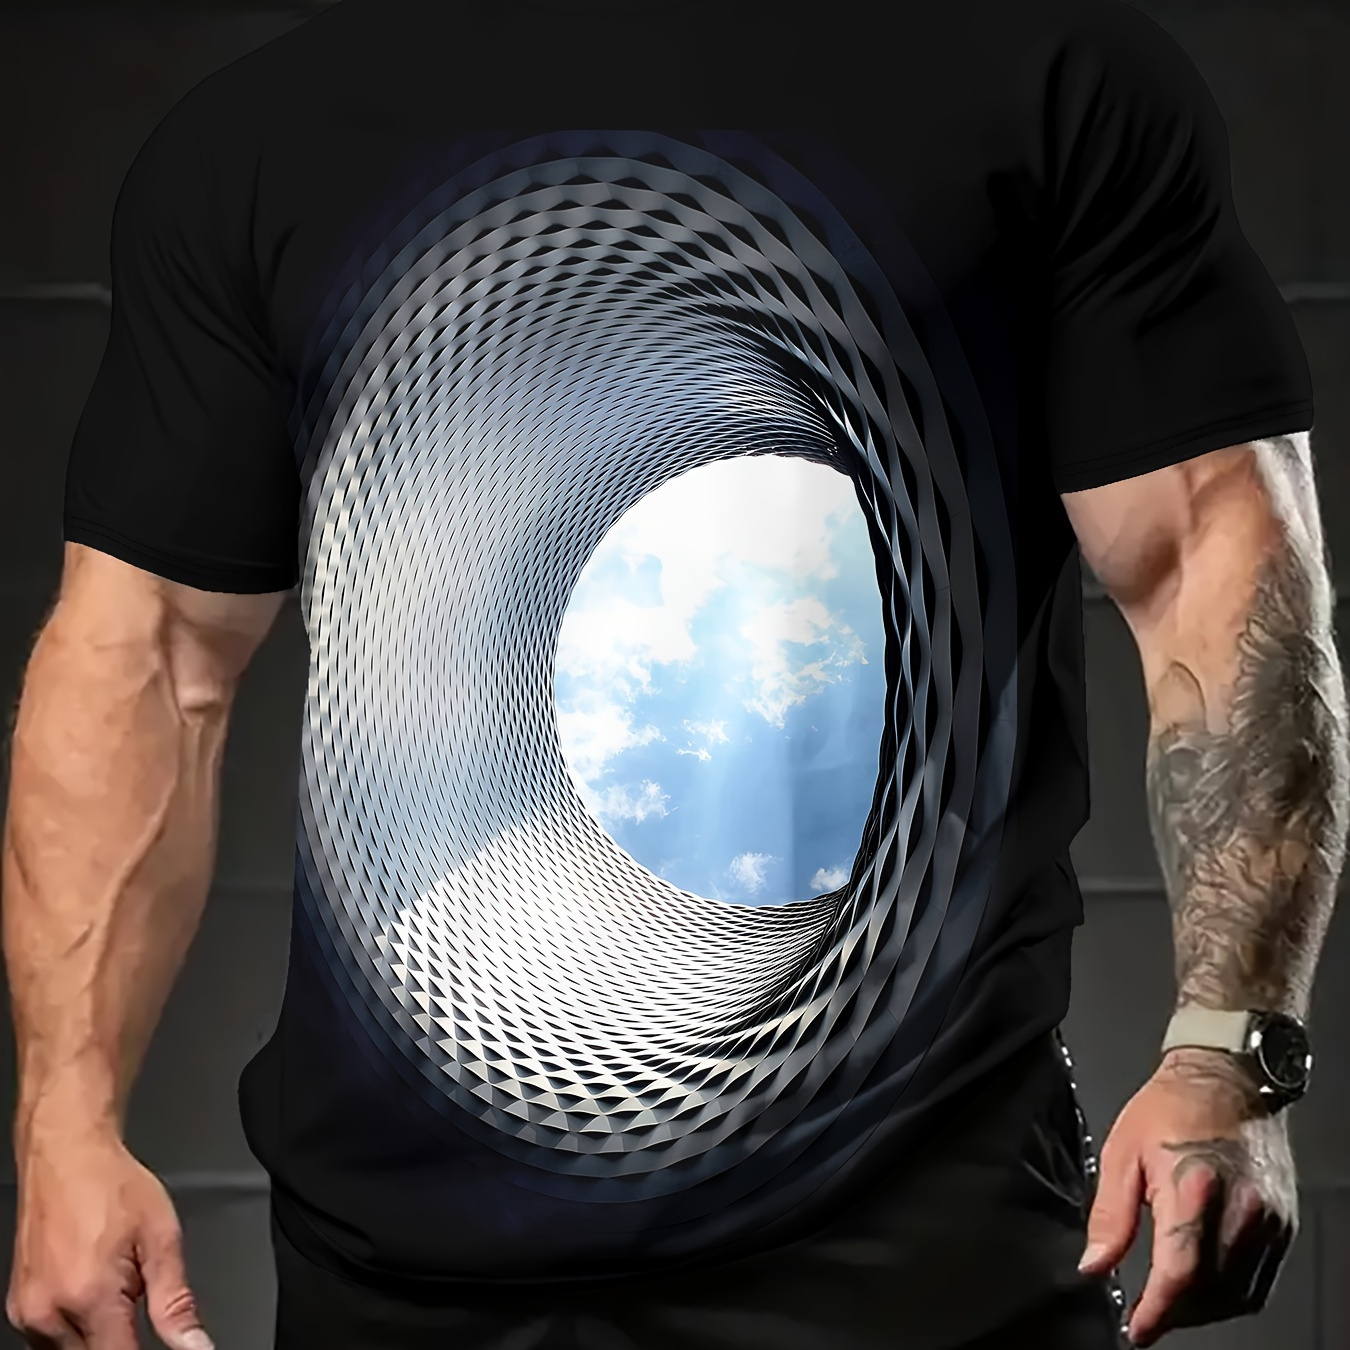 

3d Hole Graphic Printed Crew Neck Short Sleeve T-shirt For Men, Casual Summer T-shirt For Daily Wear And Vacation Resorts